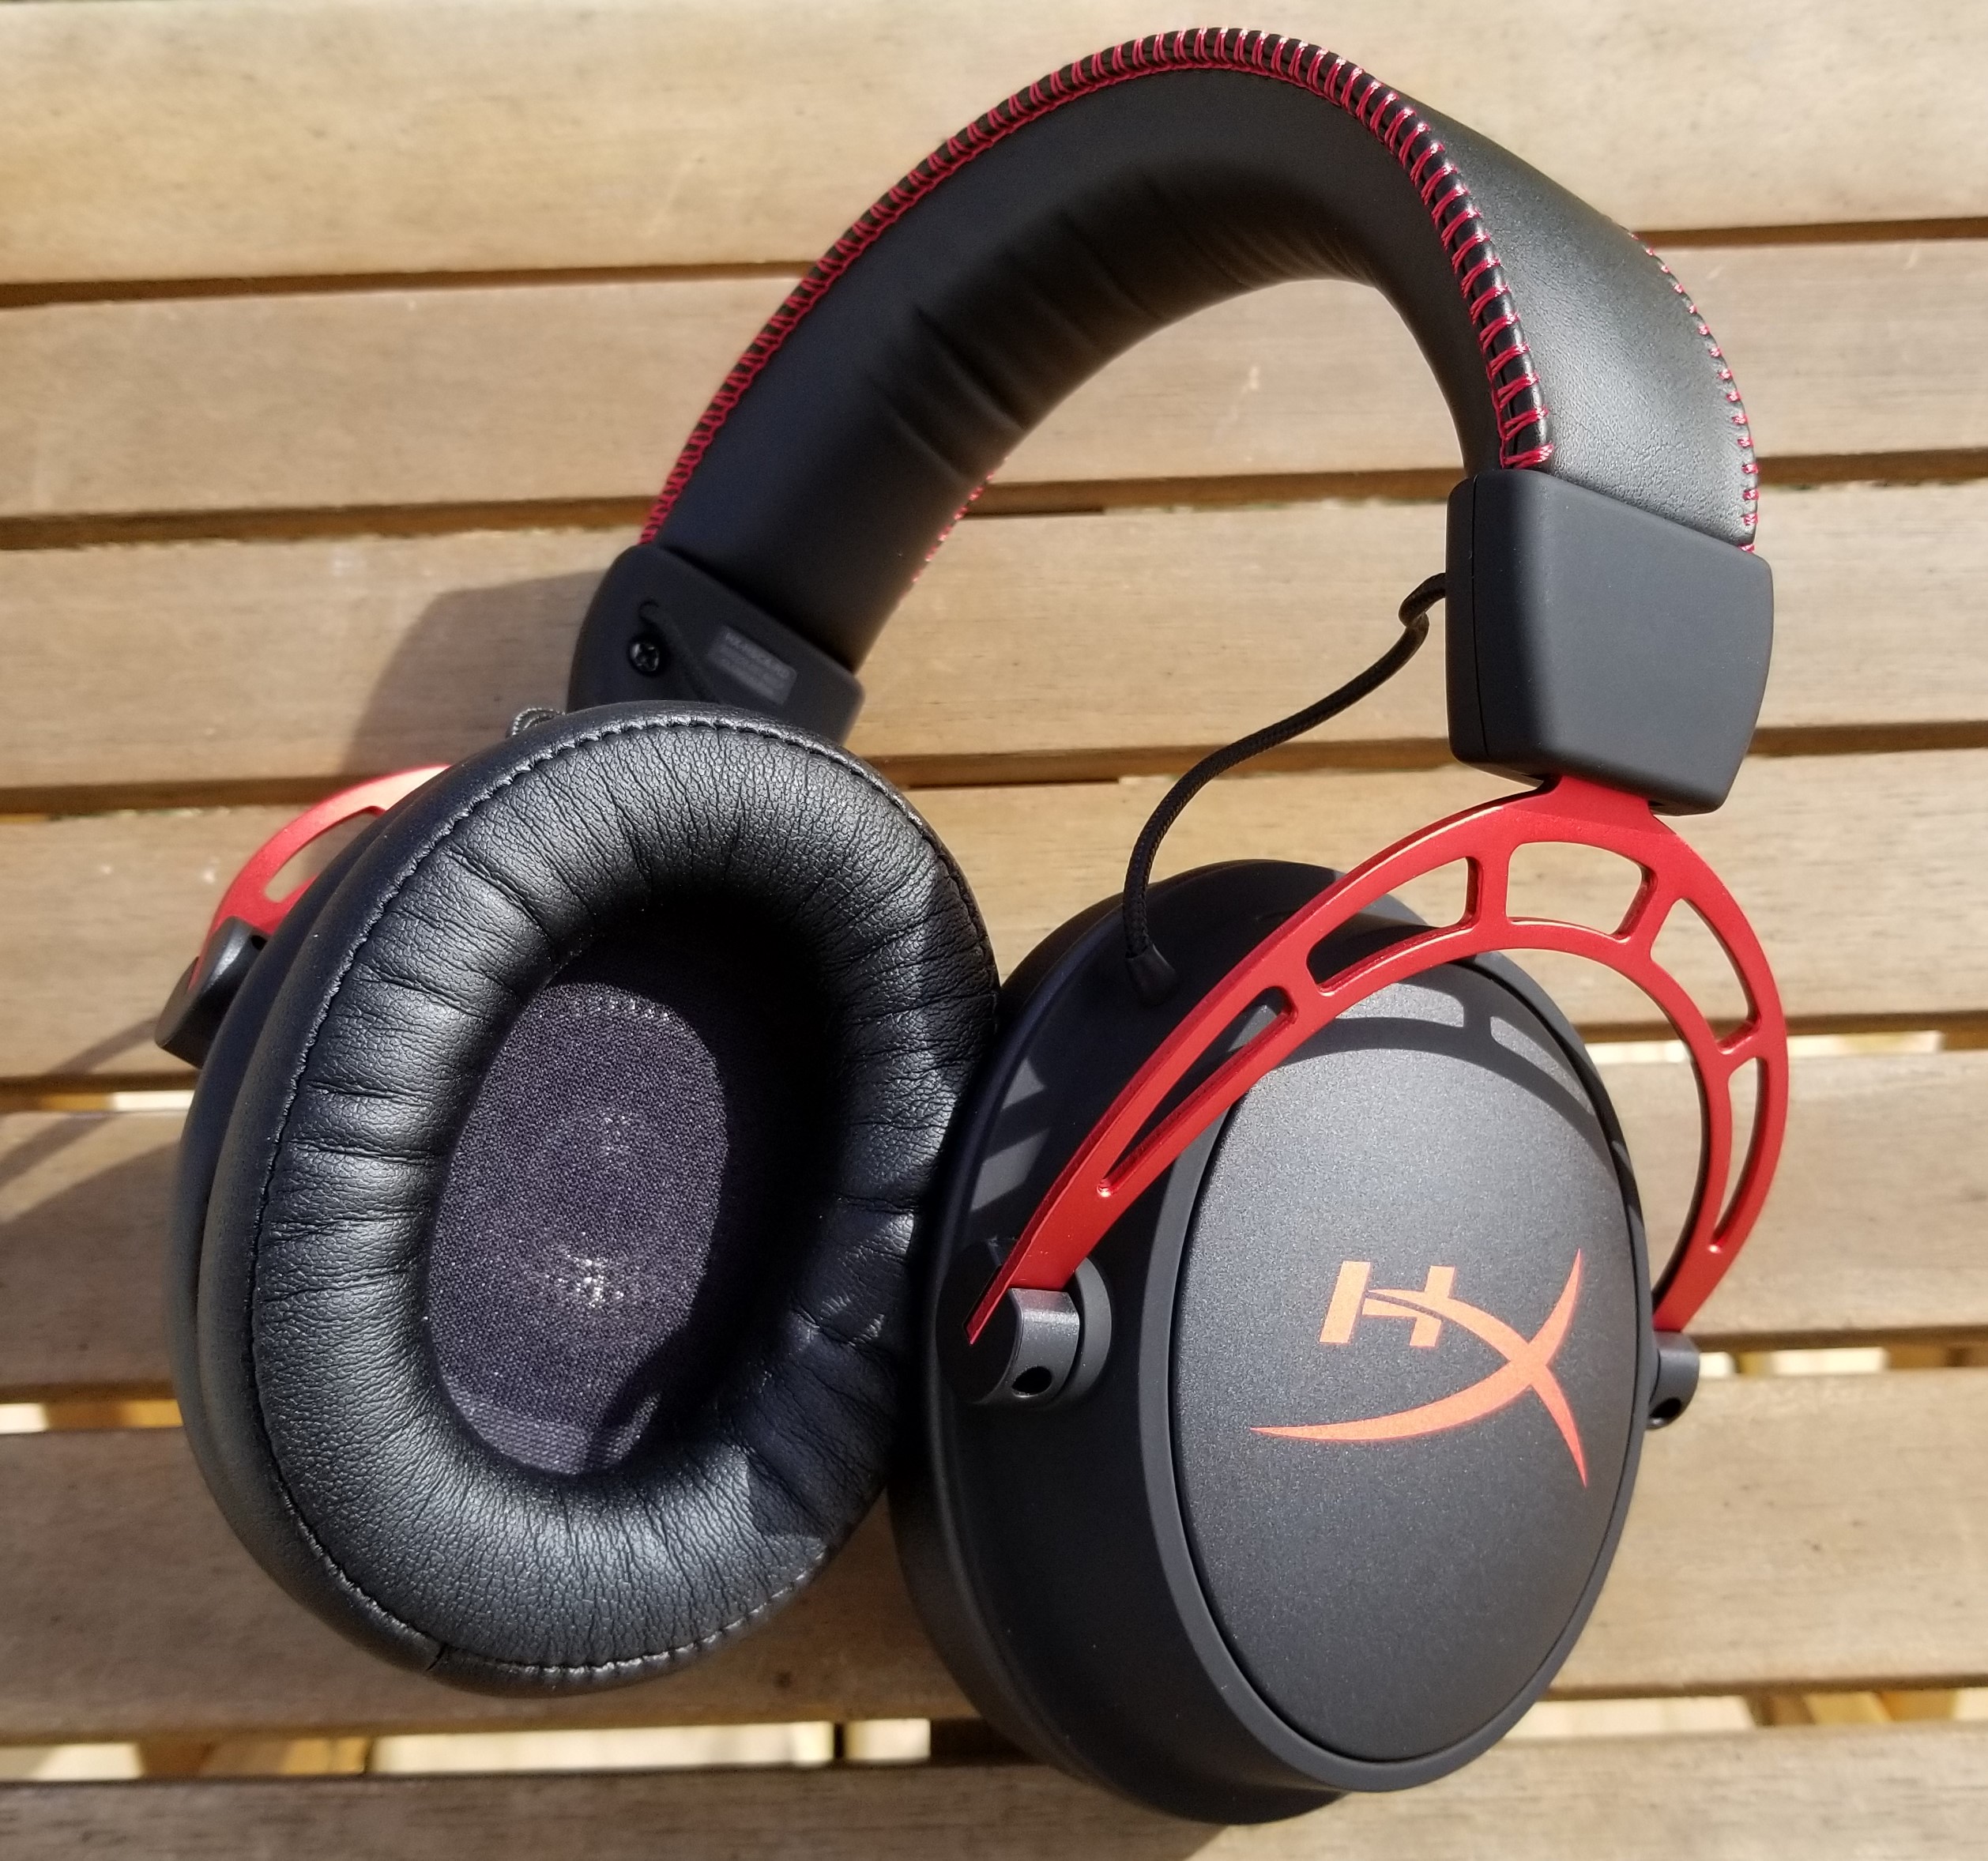 Are HyperX Headsets Good?